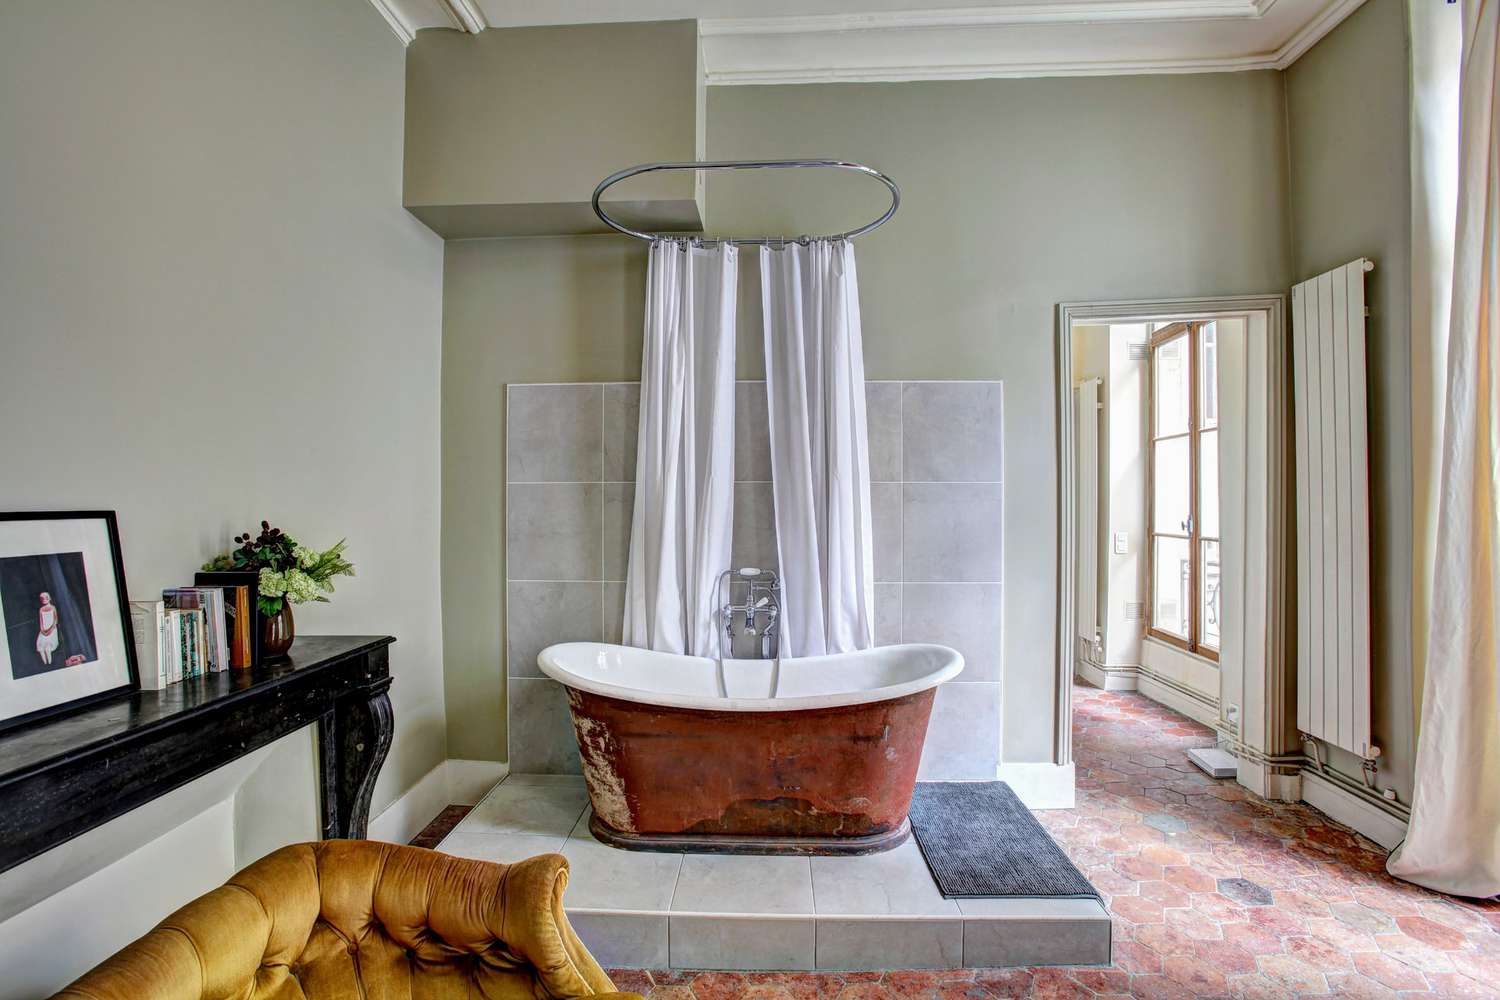 What is a garden tub ?